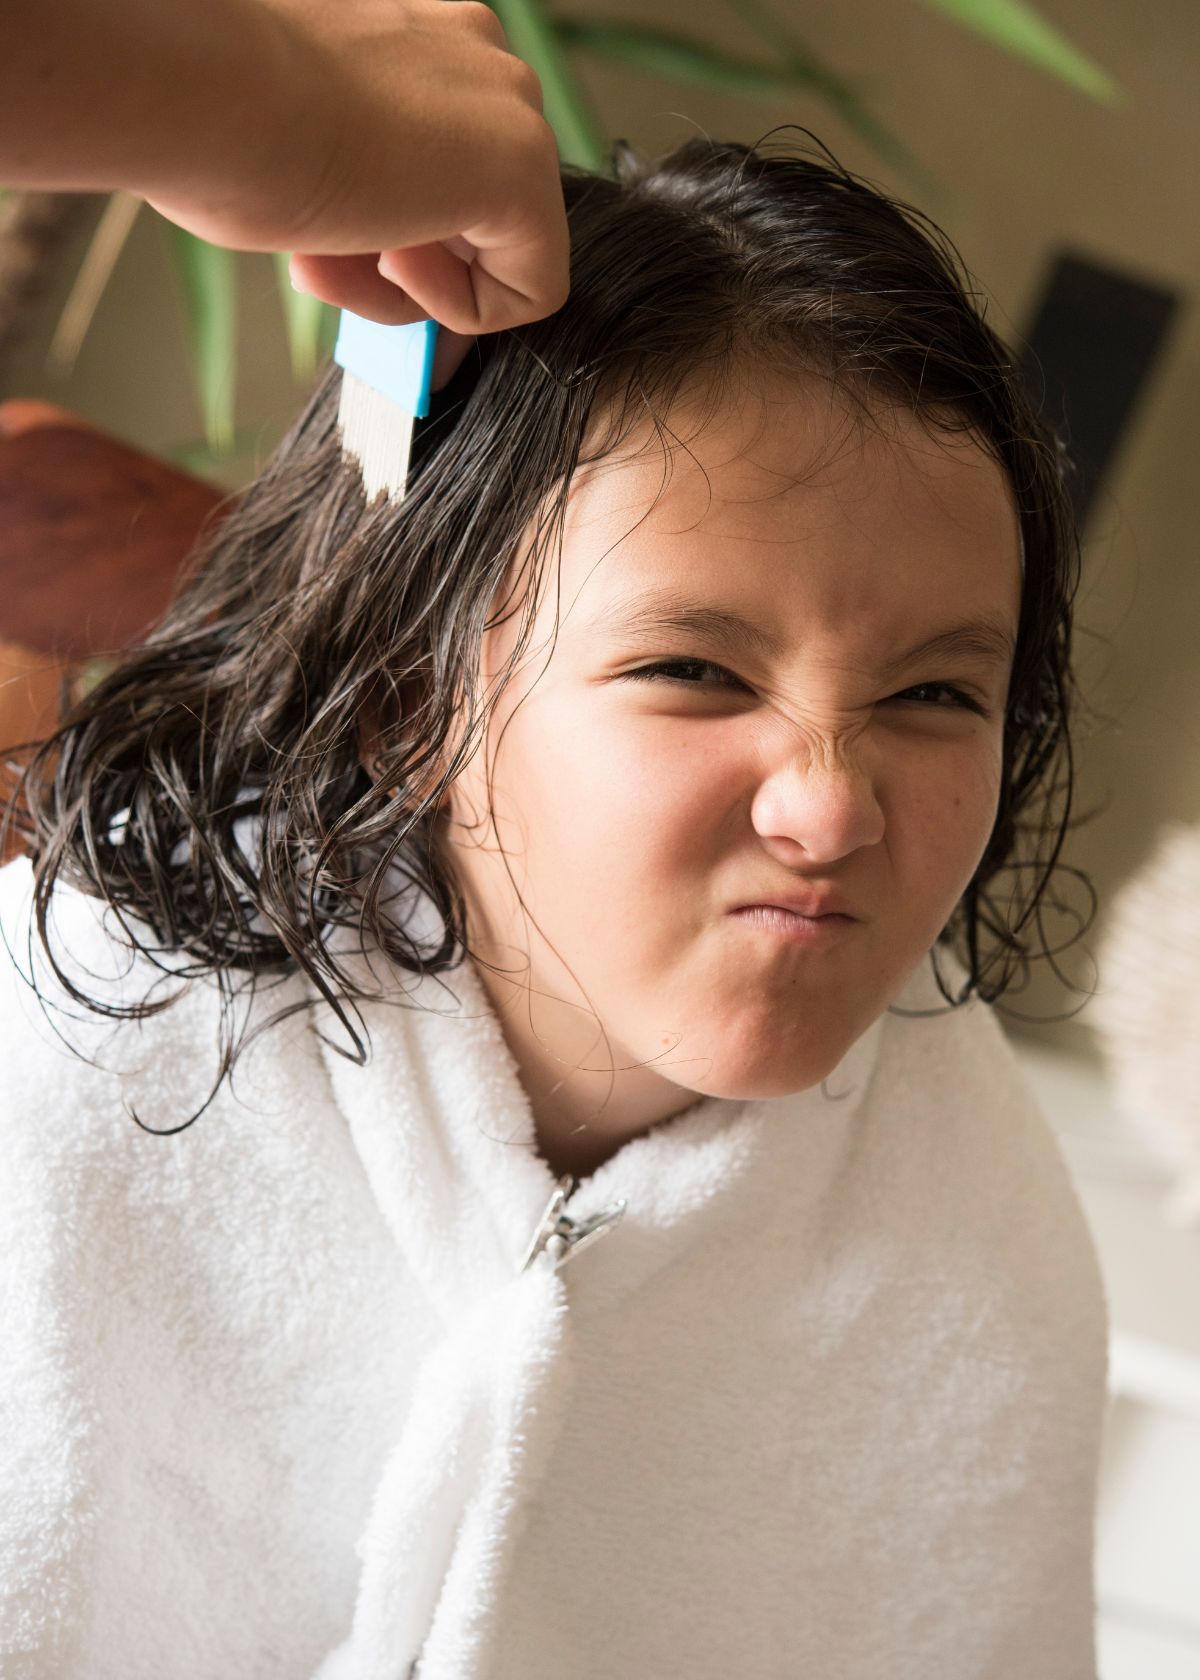 Best shampoo For Lice: Say Goodbye To Lice With Top 7 Brands!